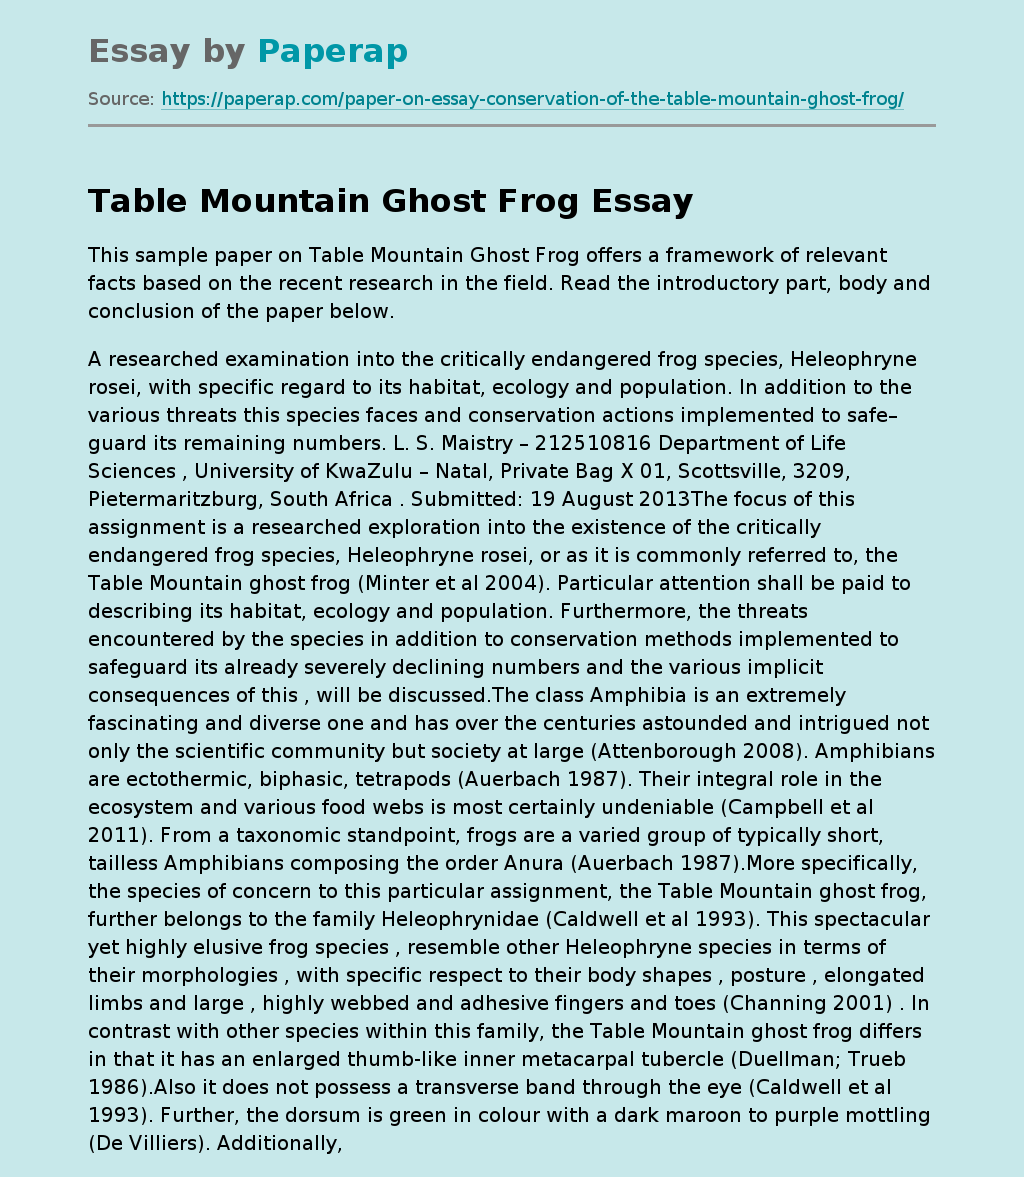 Sample Paper on Table Mountain Ghost Frog